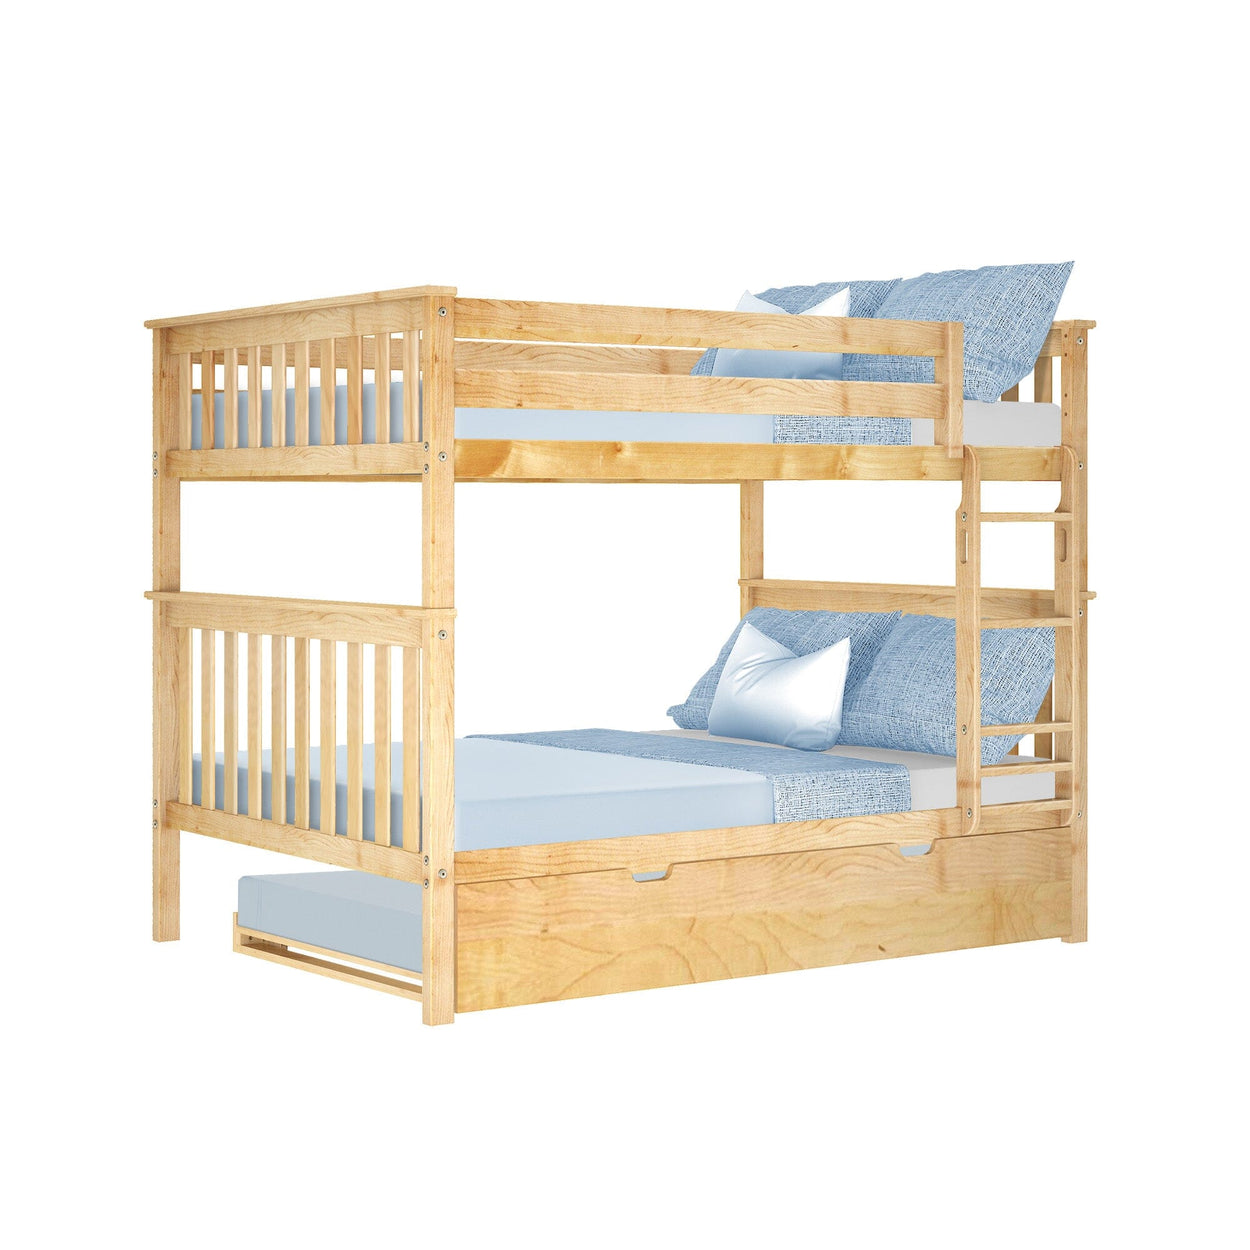 Bunk Beds Max & Lily Kid's Full Over Full-Size Bunk Bed with Trundle 